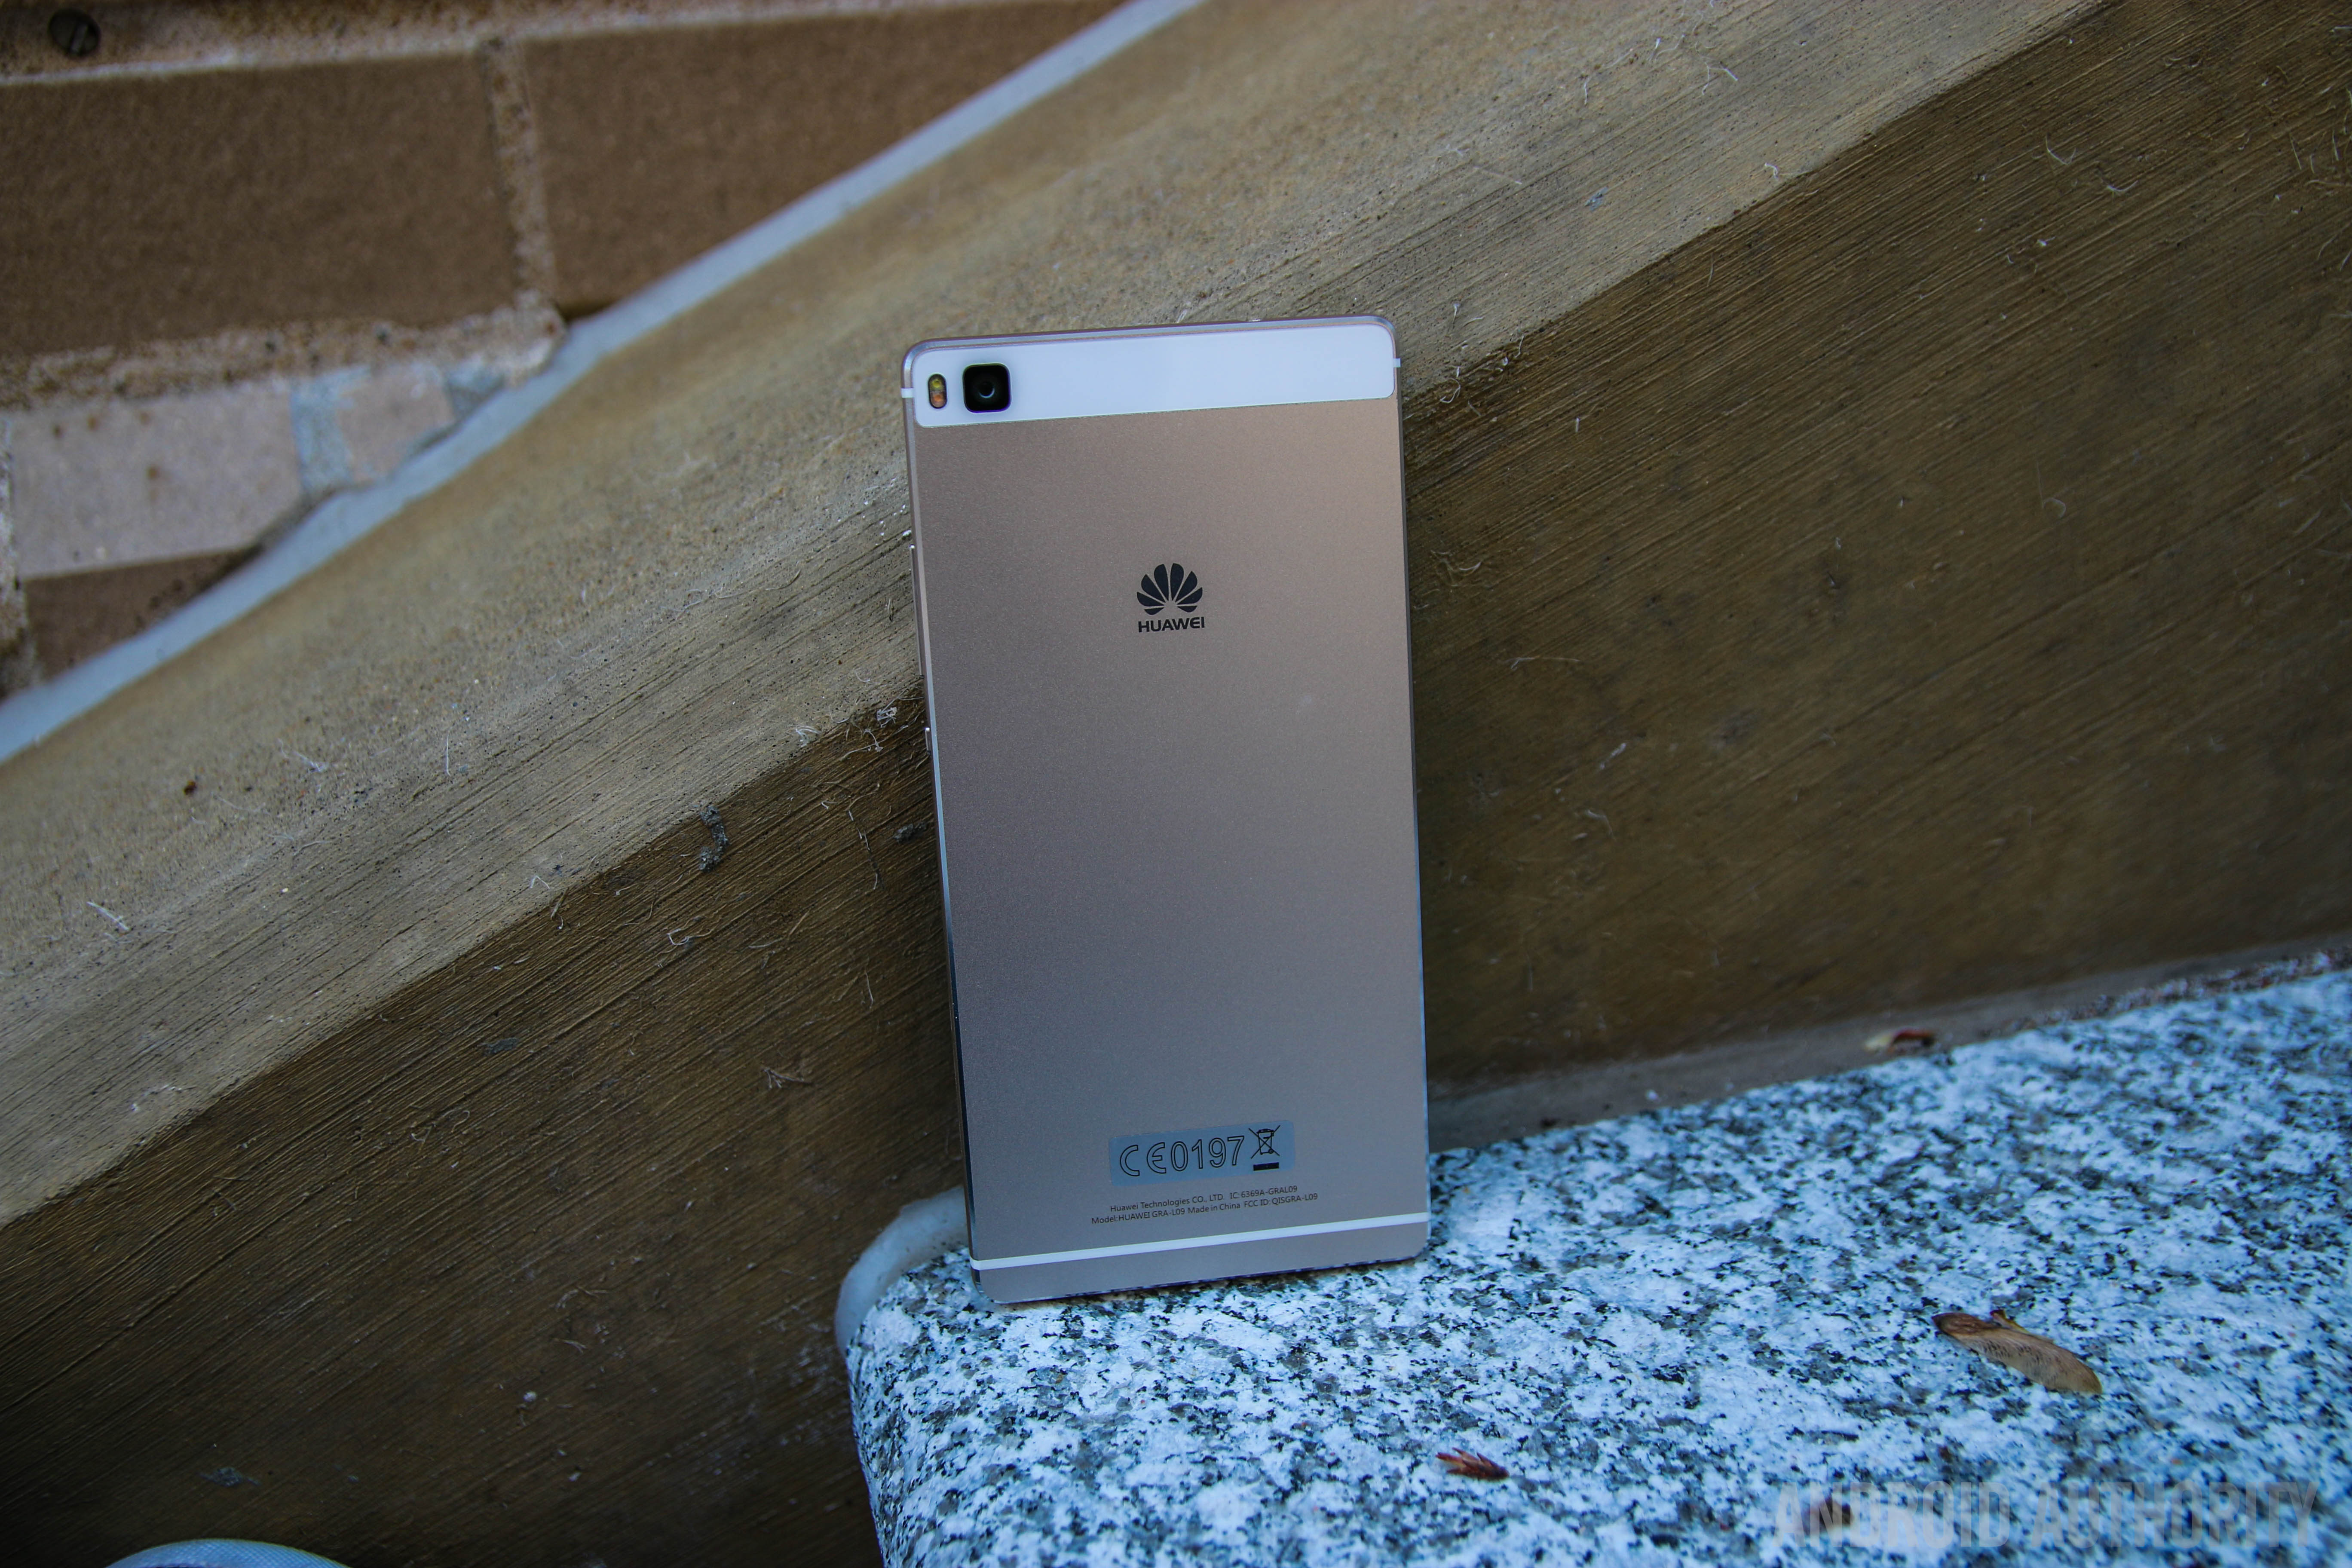 Huawei P8, the company's latest flagship